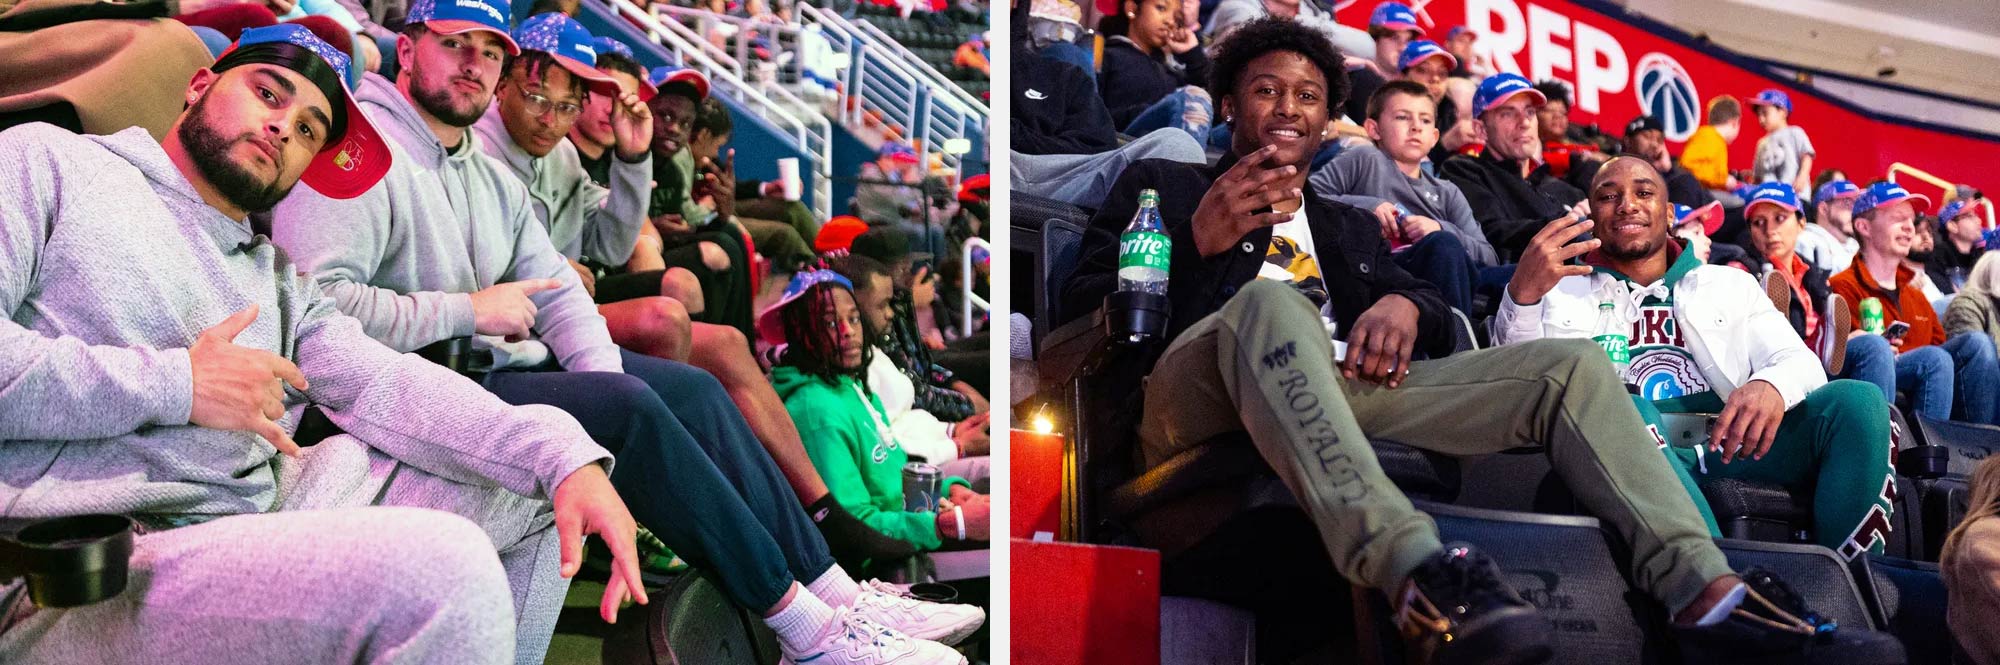 Photos of the UVA Football players sitting in the stands at the Washington Wizards game